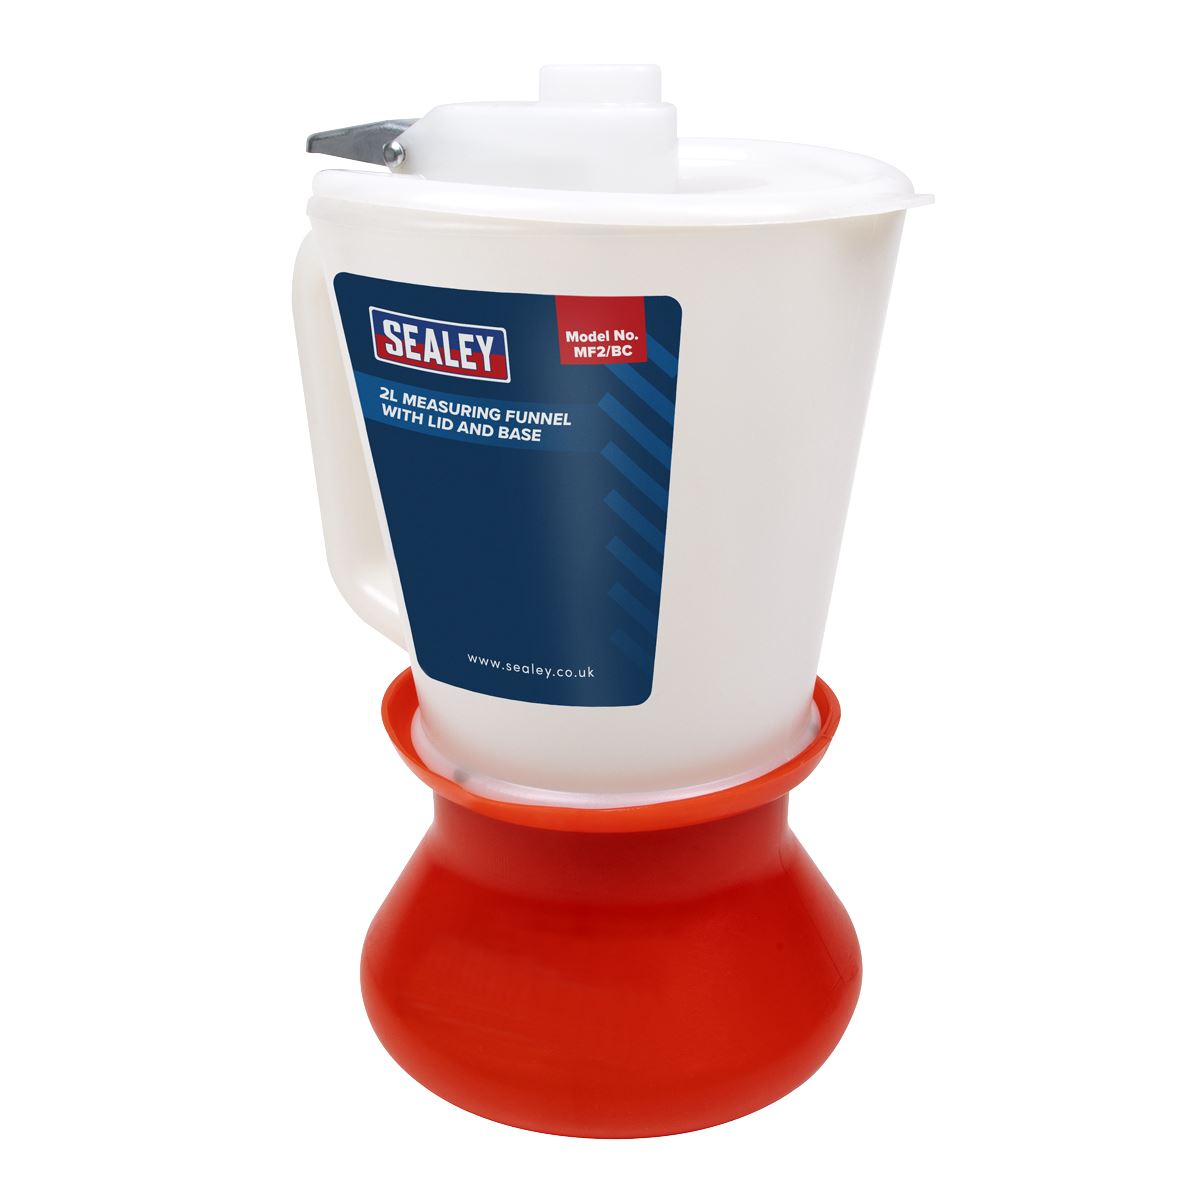 Sealey Measuring Funnel with Lid and Base 2L